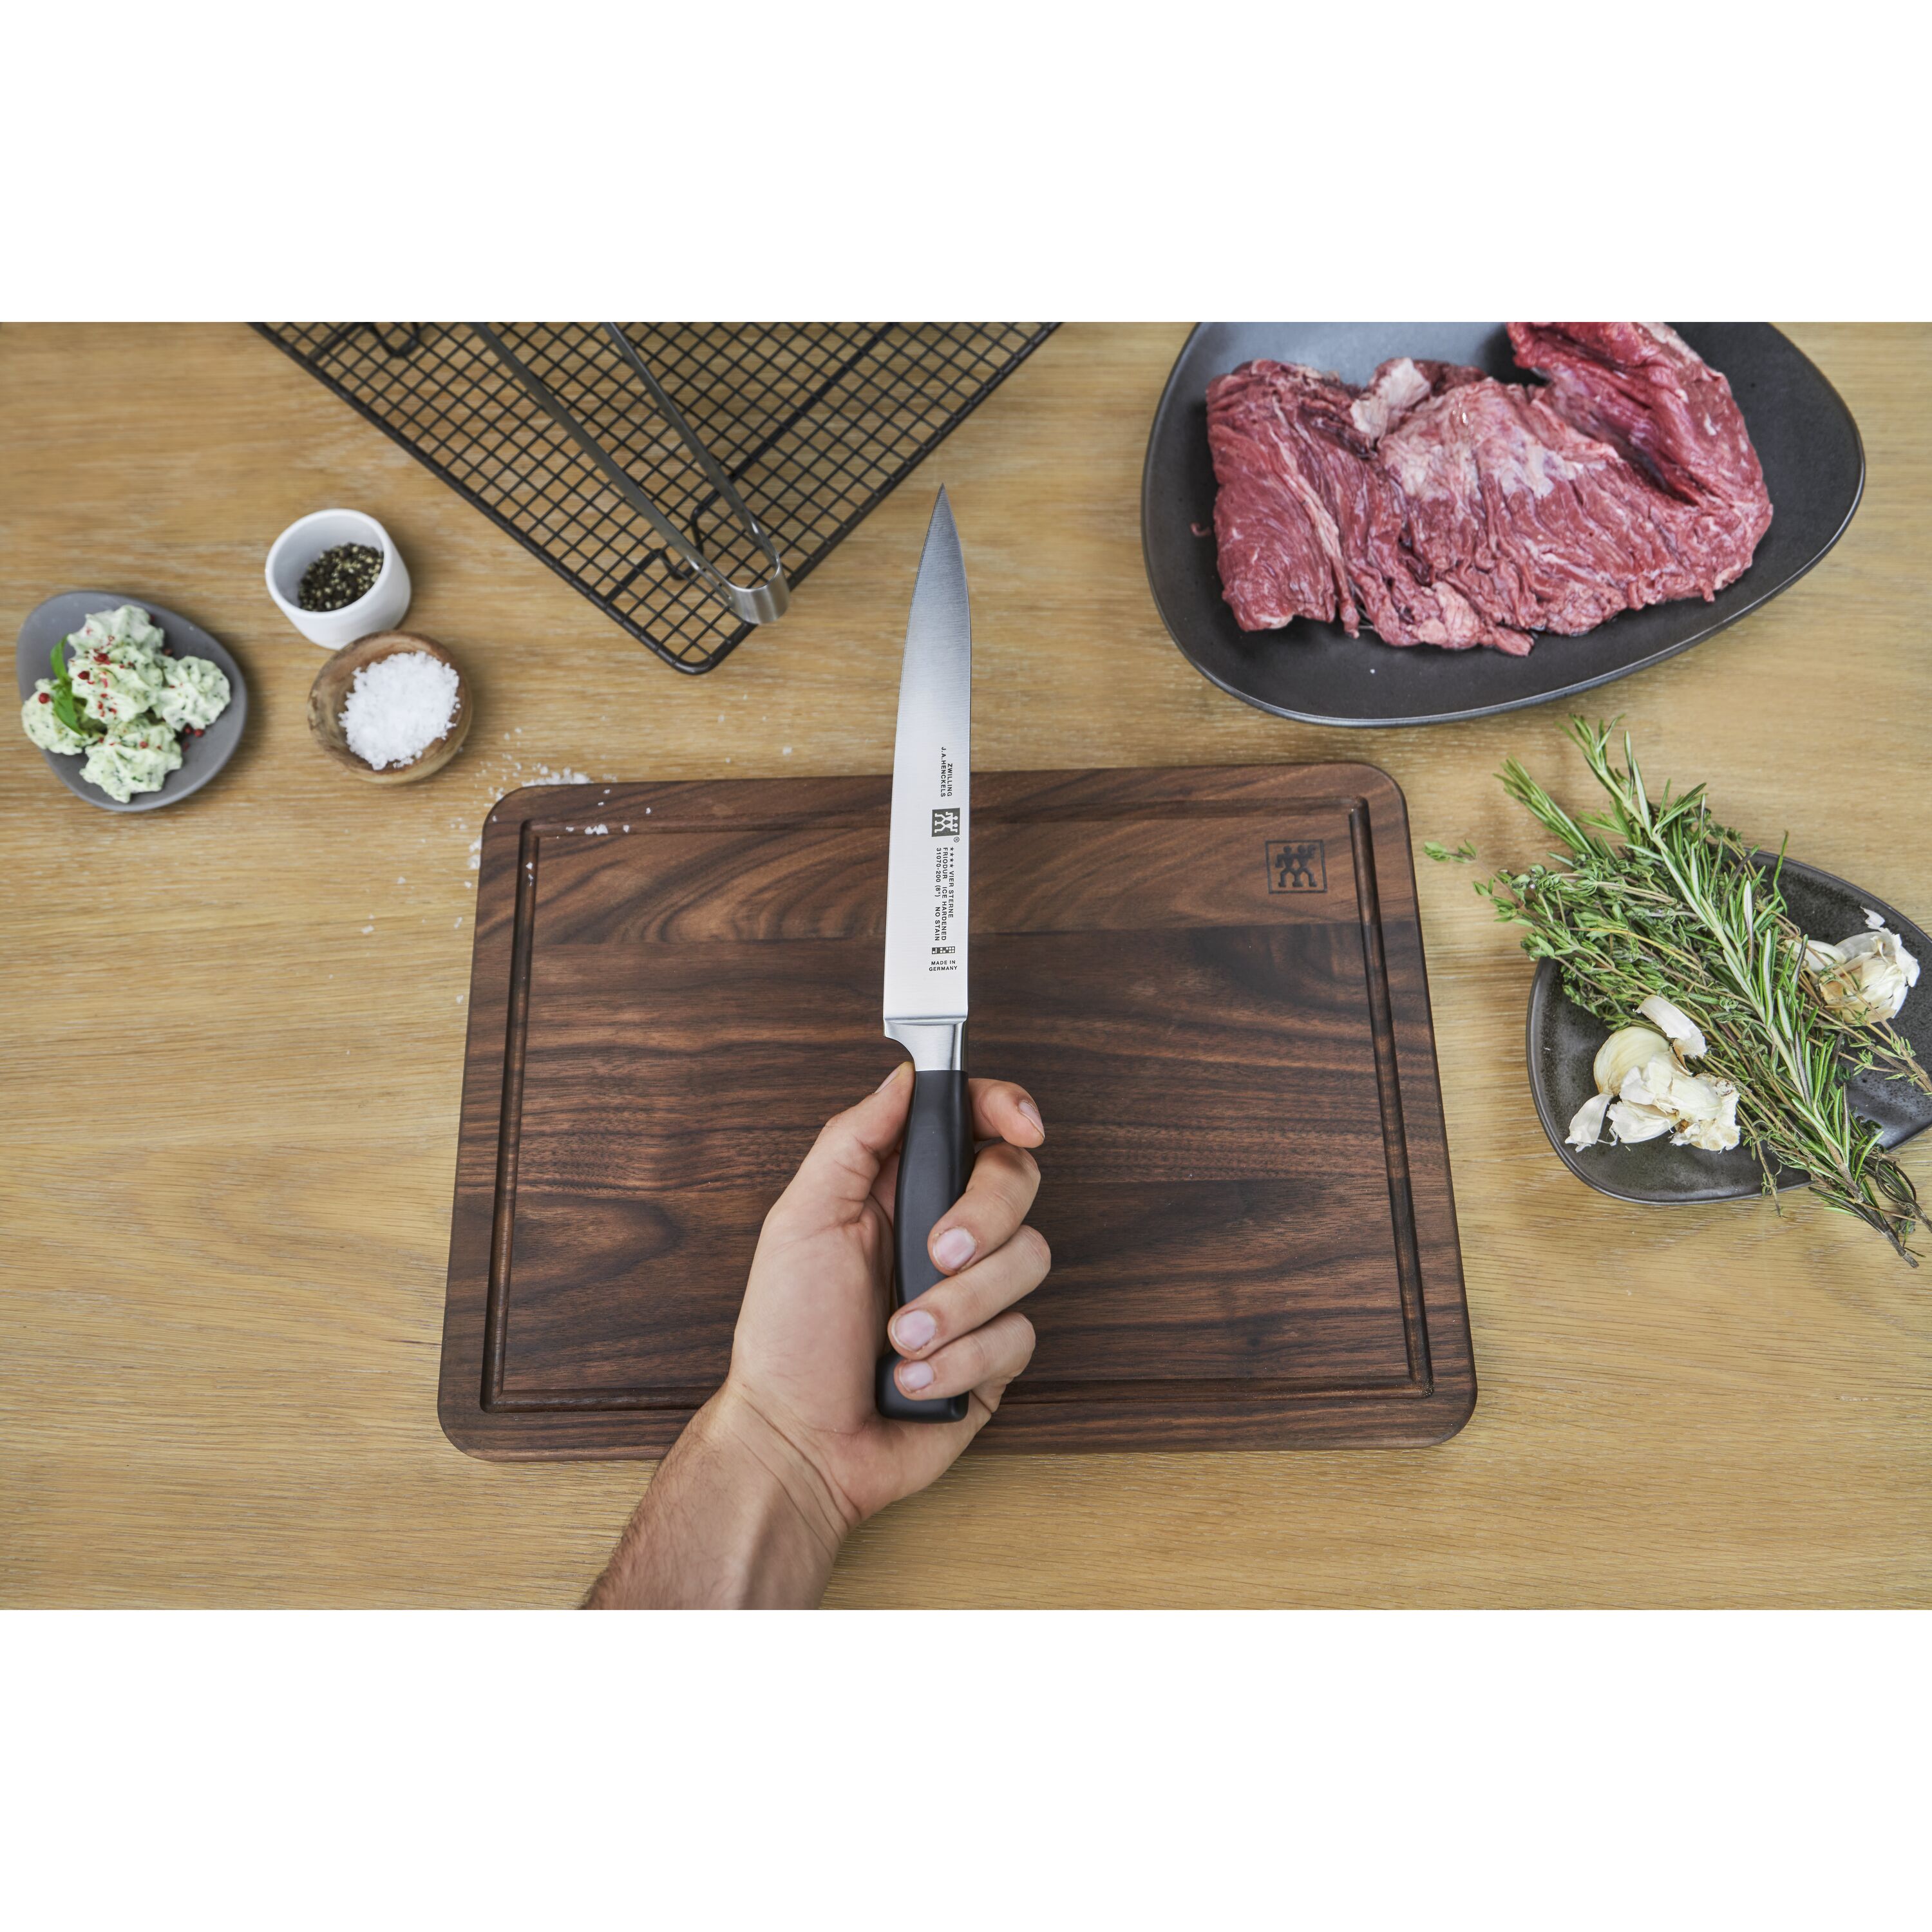 ZWILLING Four Star 8-inch, Slicing/Carving Knife